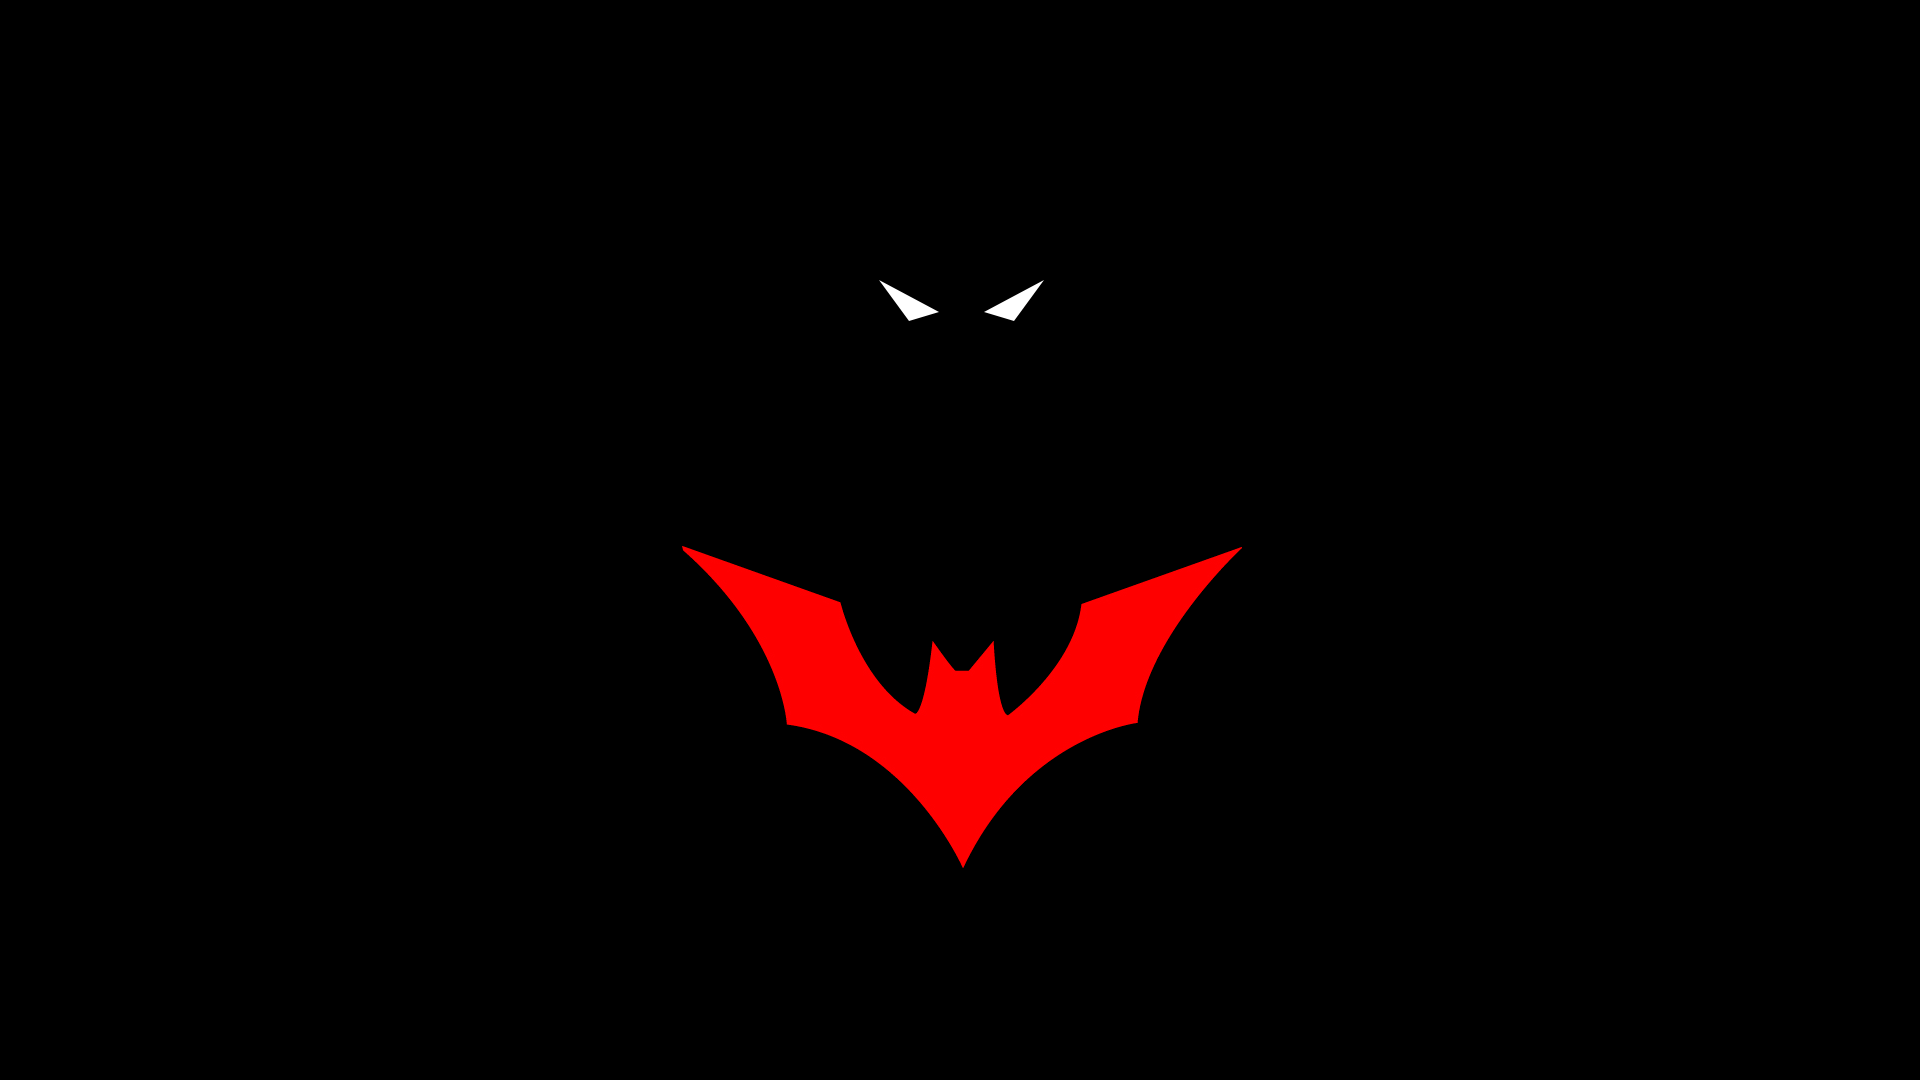 Bat with Red Background Logo - 50 Batman Logo wallpapers For Free Download (HD 1080p)